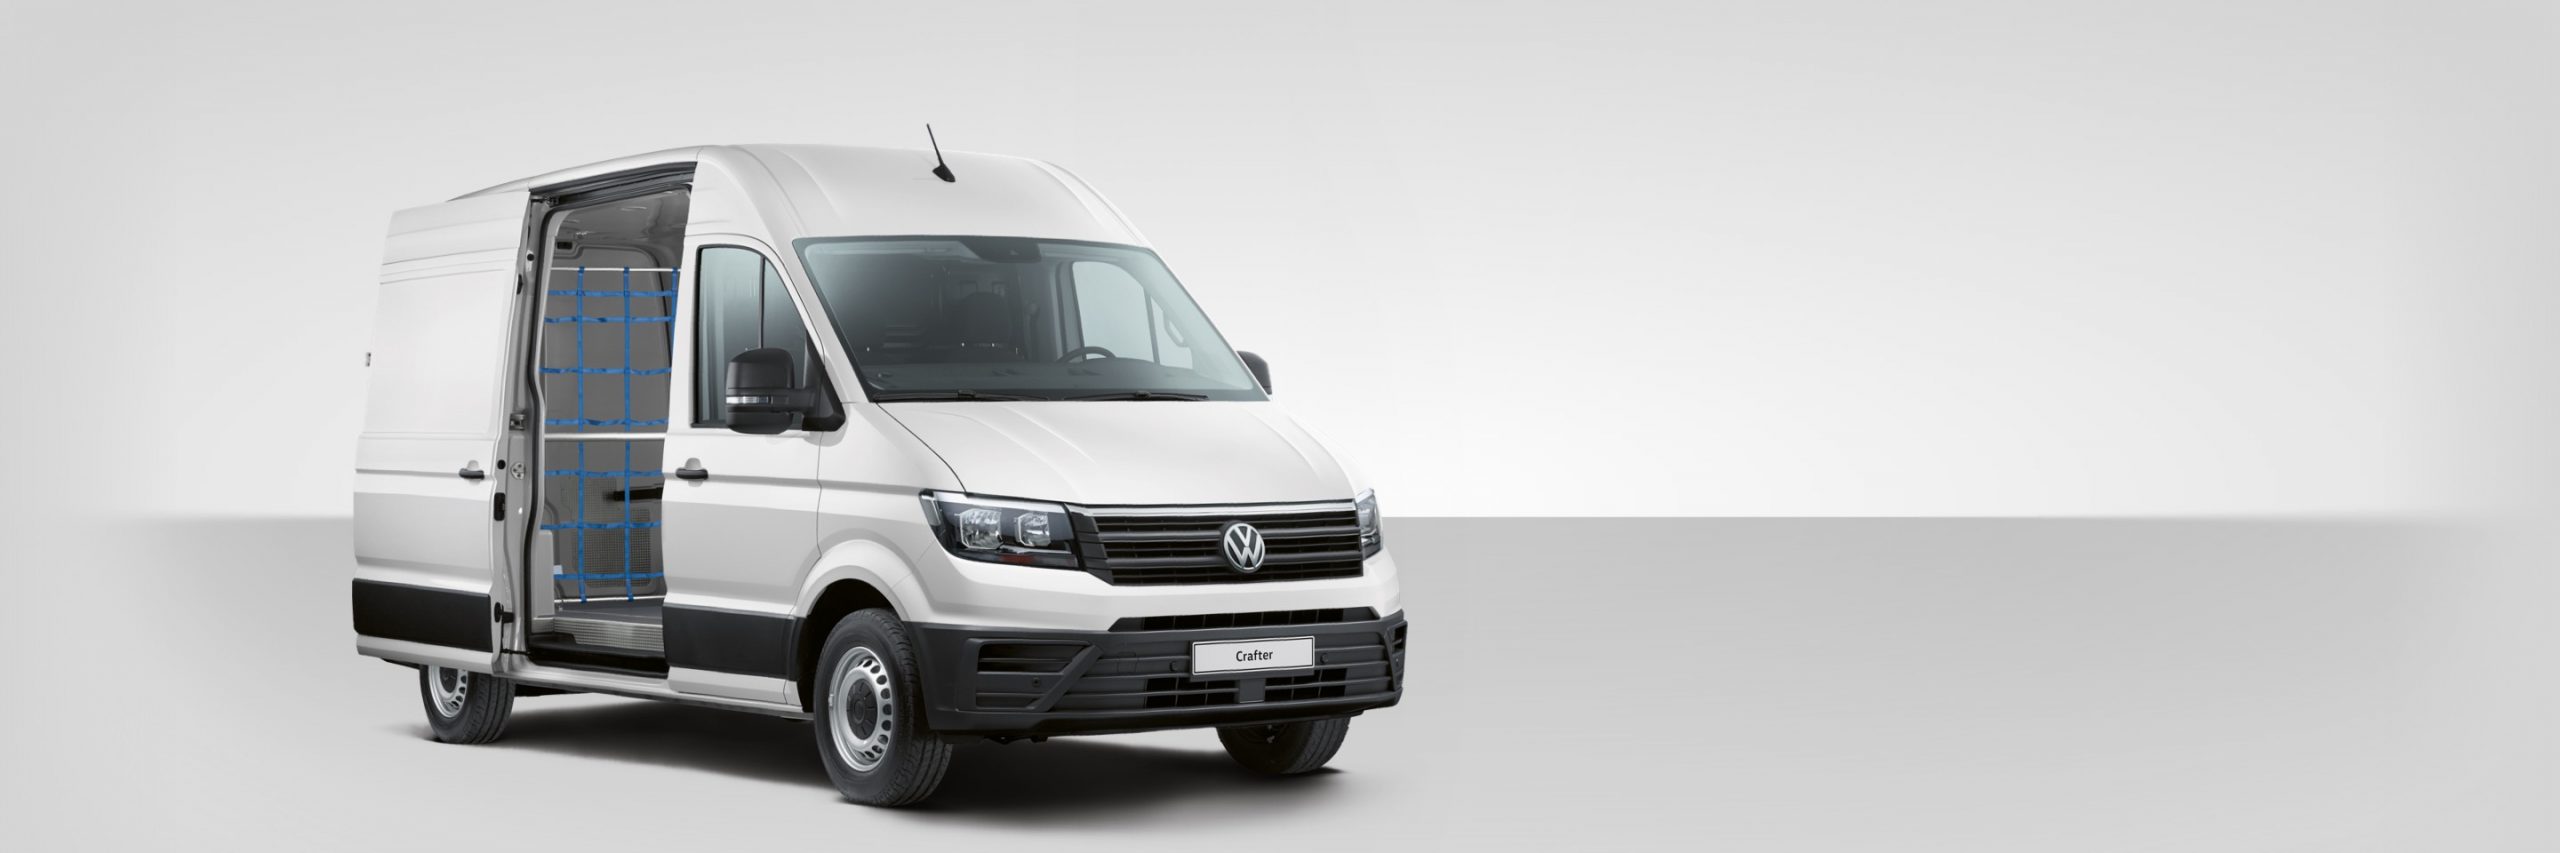 vw neuer crafter2x scaled